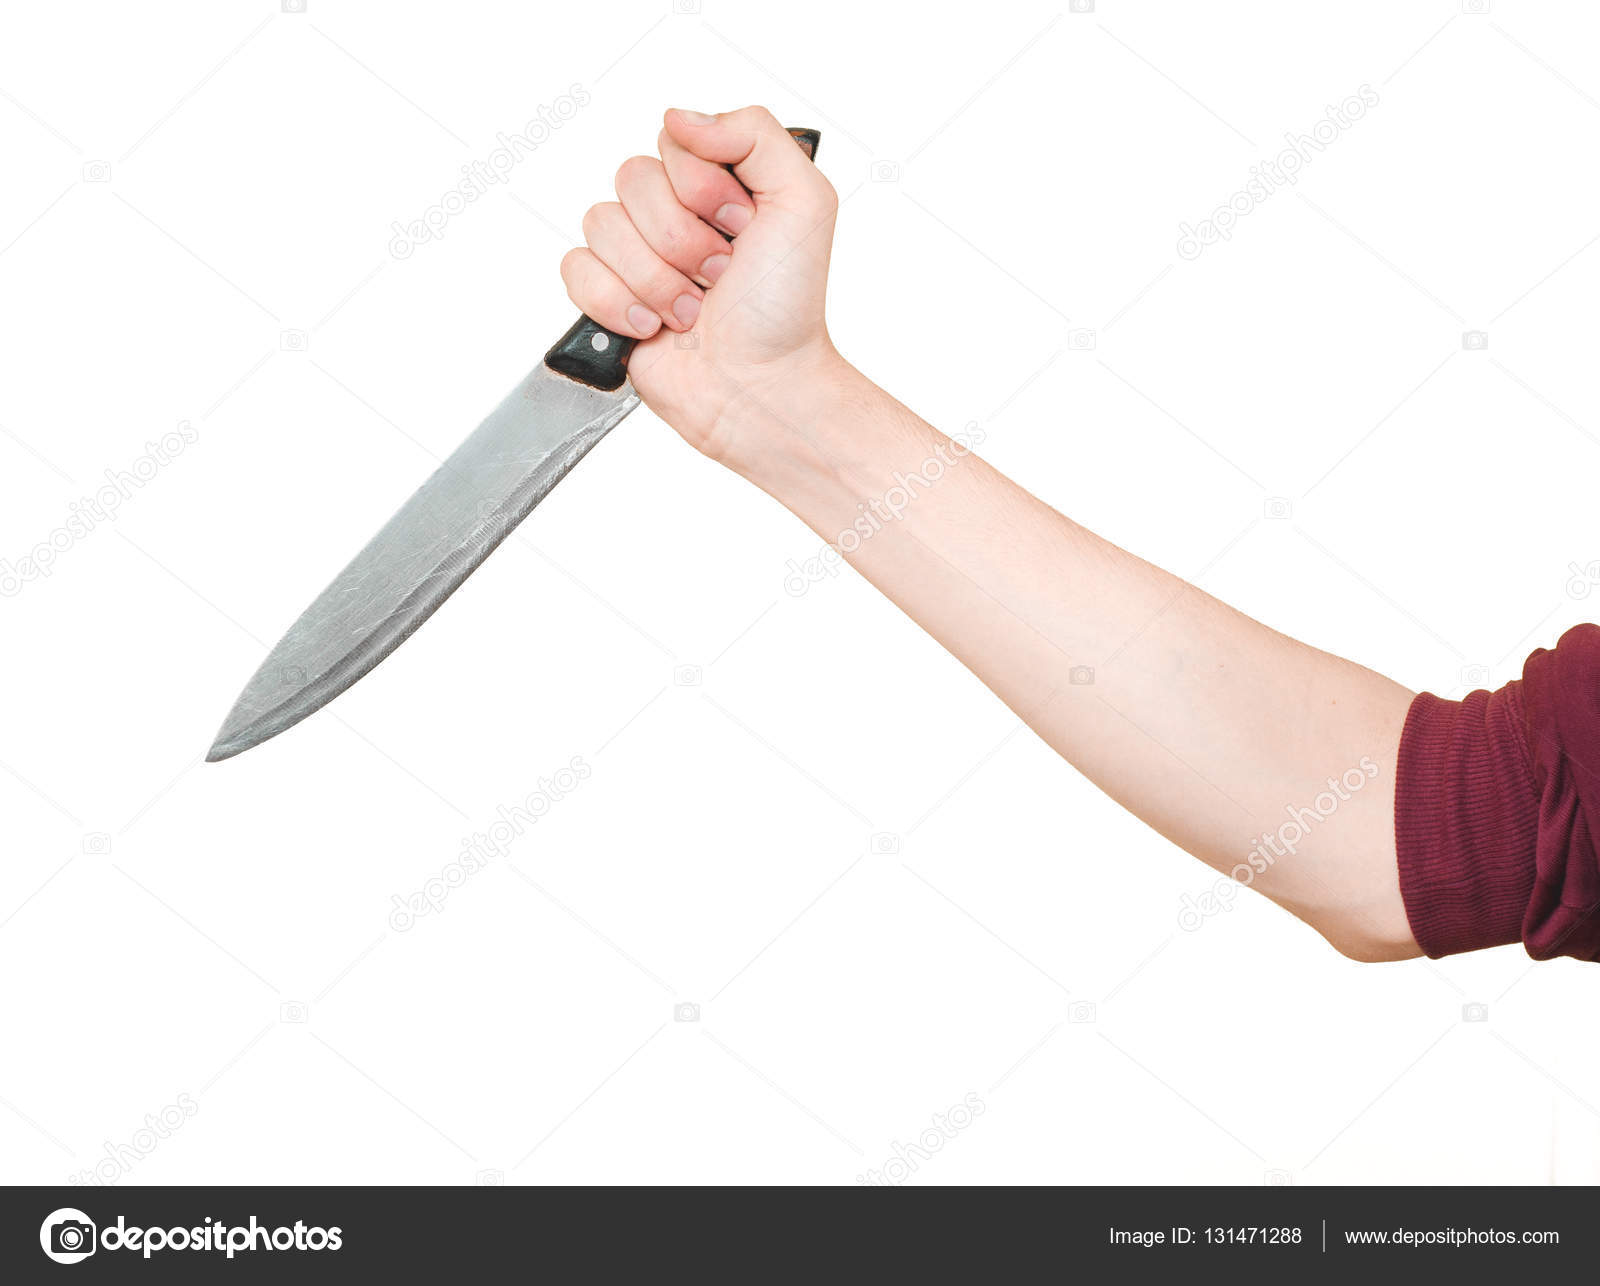 Male arm holding big large sharp kitchen knife in threatening ...